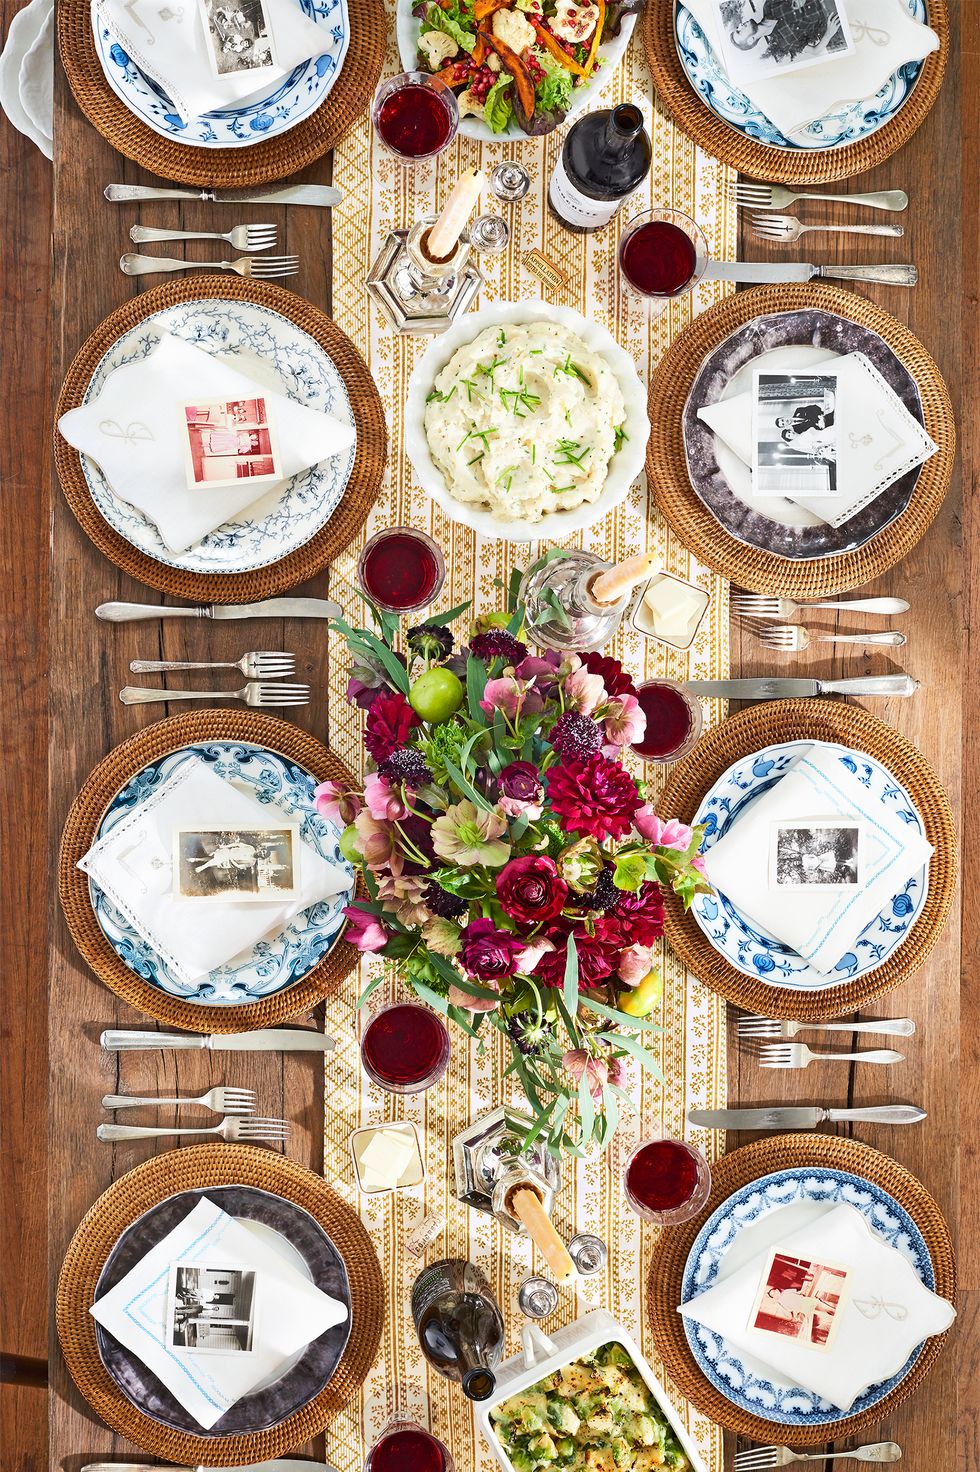 Simple and Charming Thanksgiving Table Decorating Ideas The Inspired Room